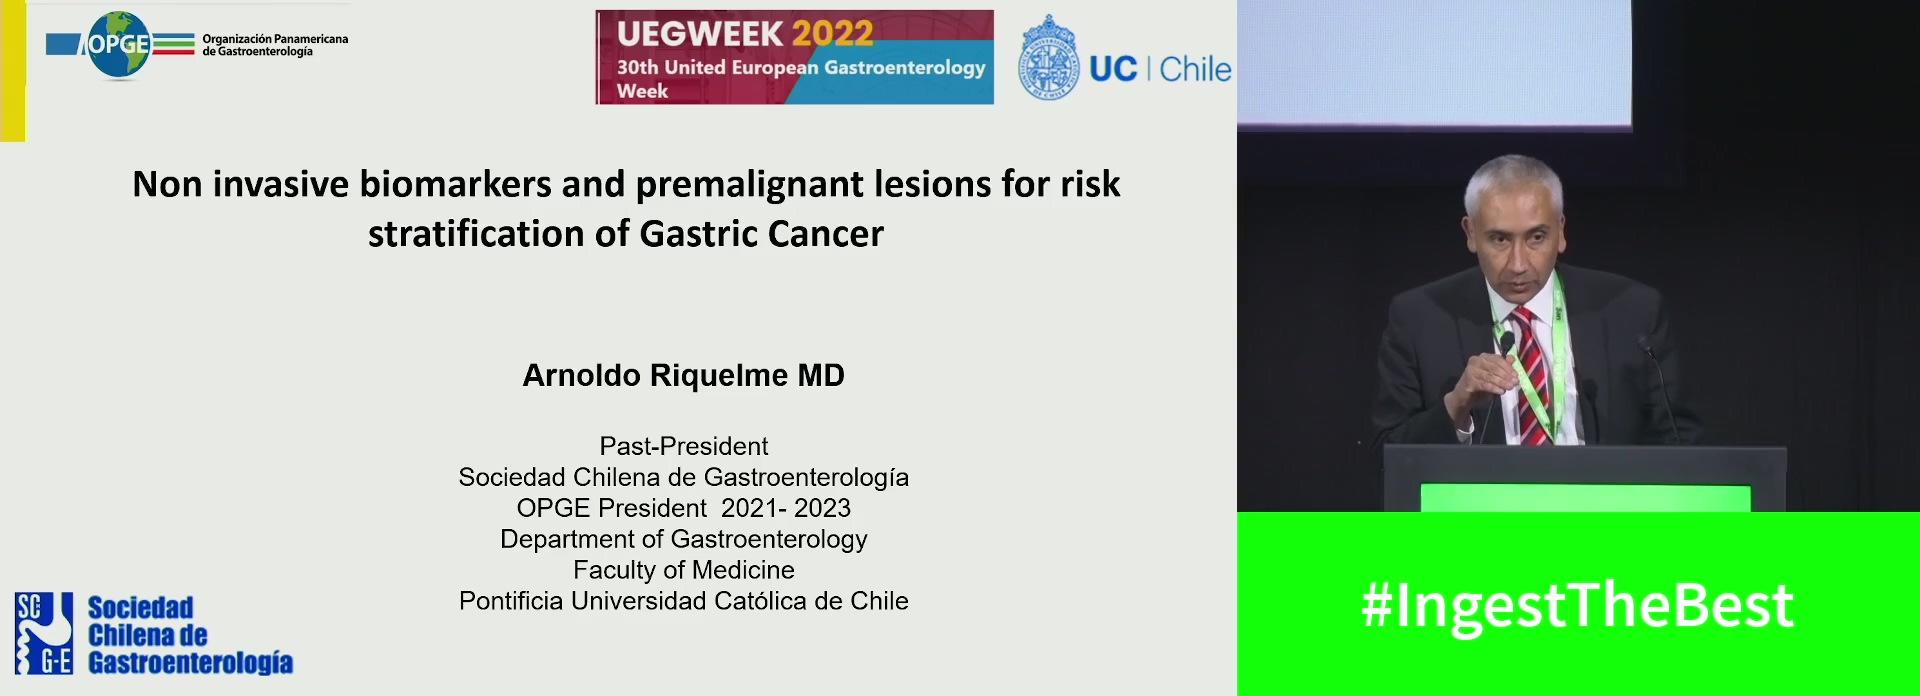 Non invasive biomarkers and premalignant lesions for Risk stratification of Gastric Cancer